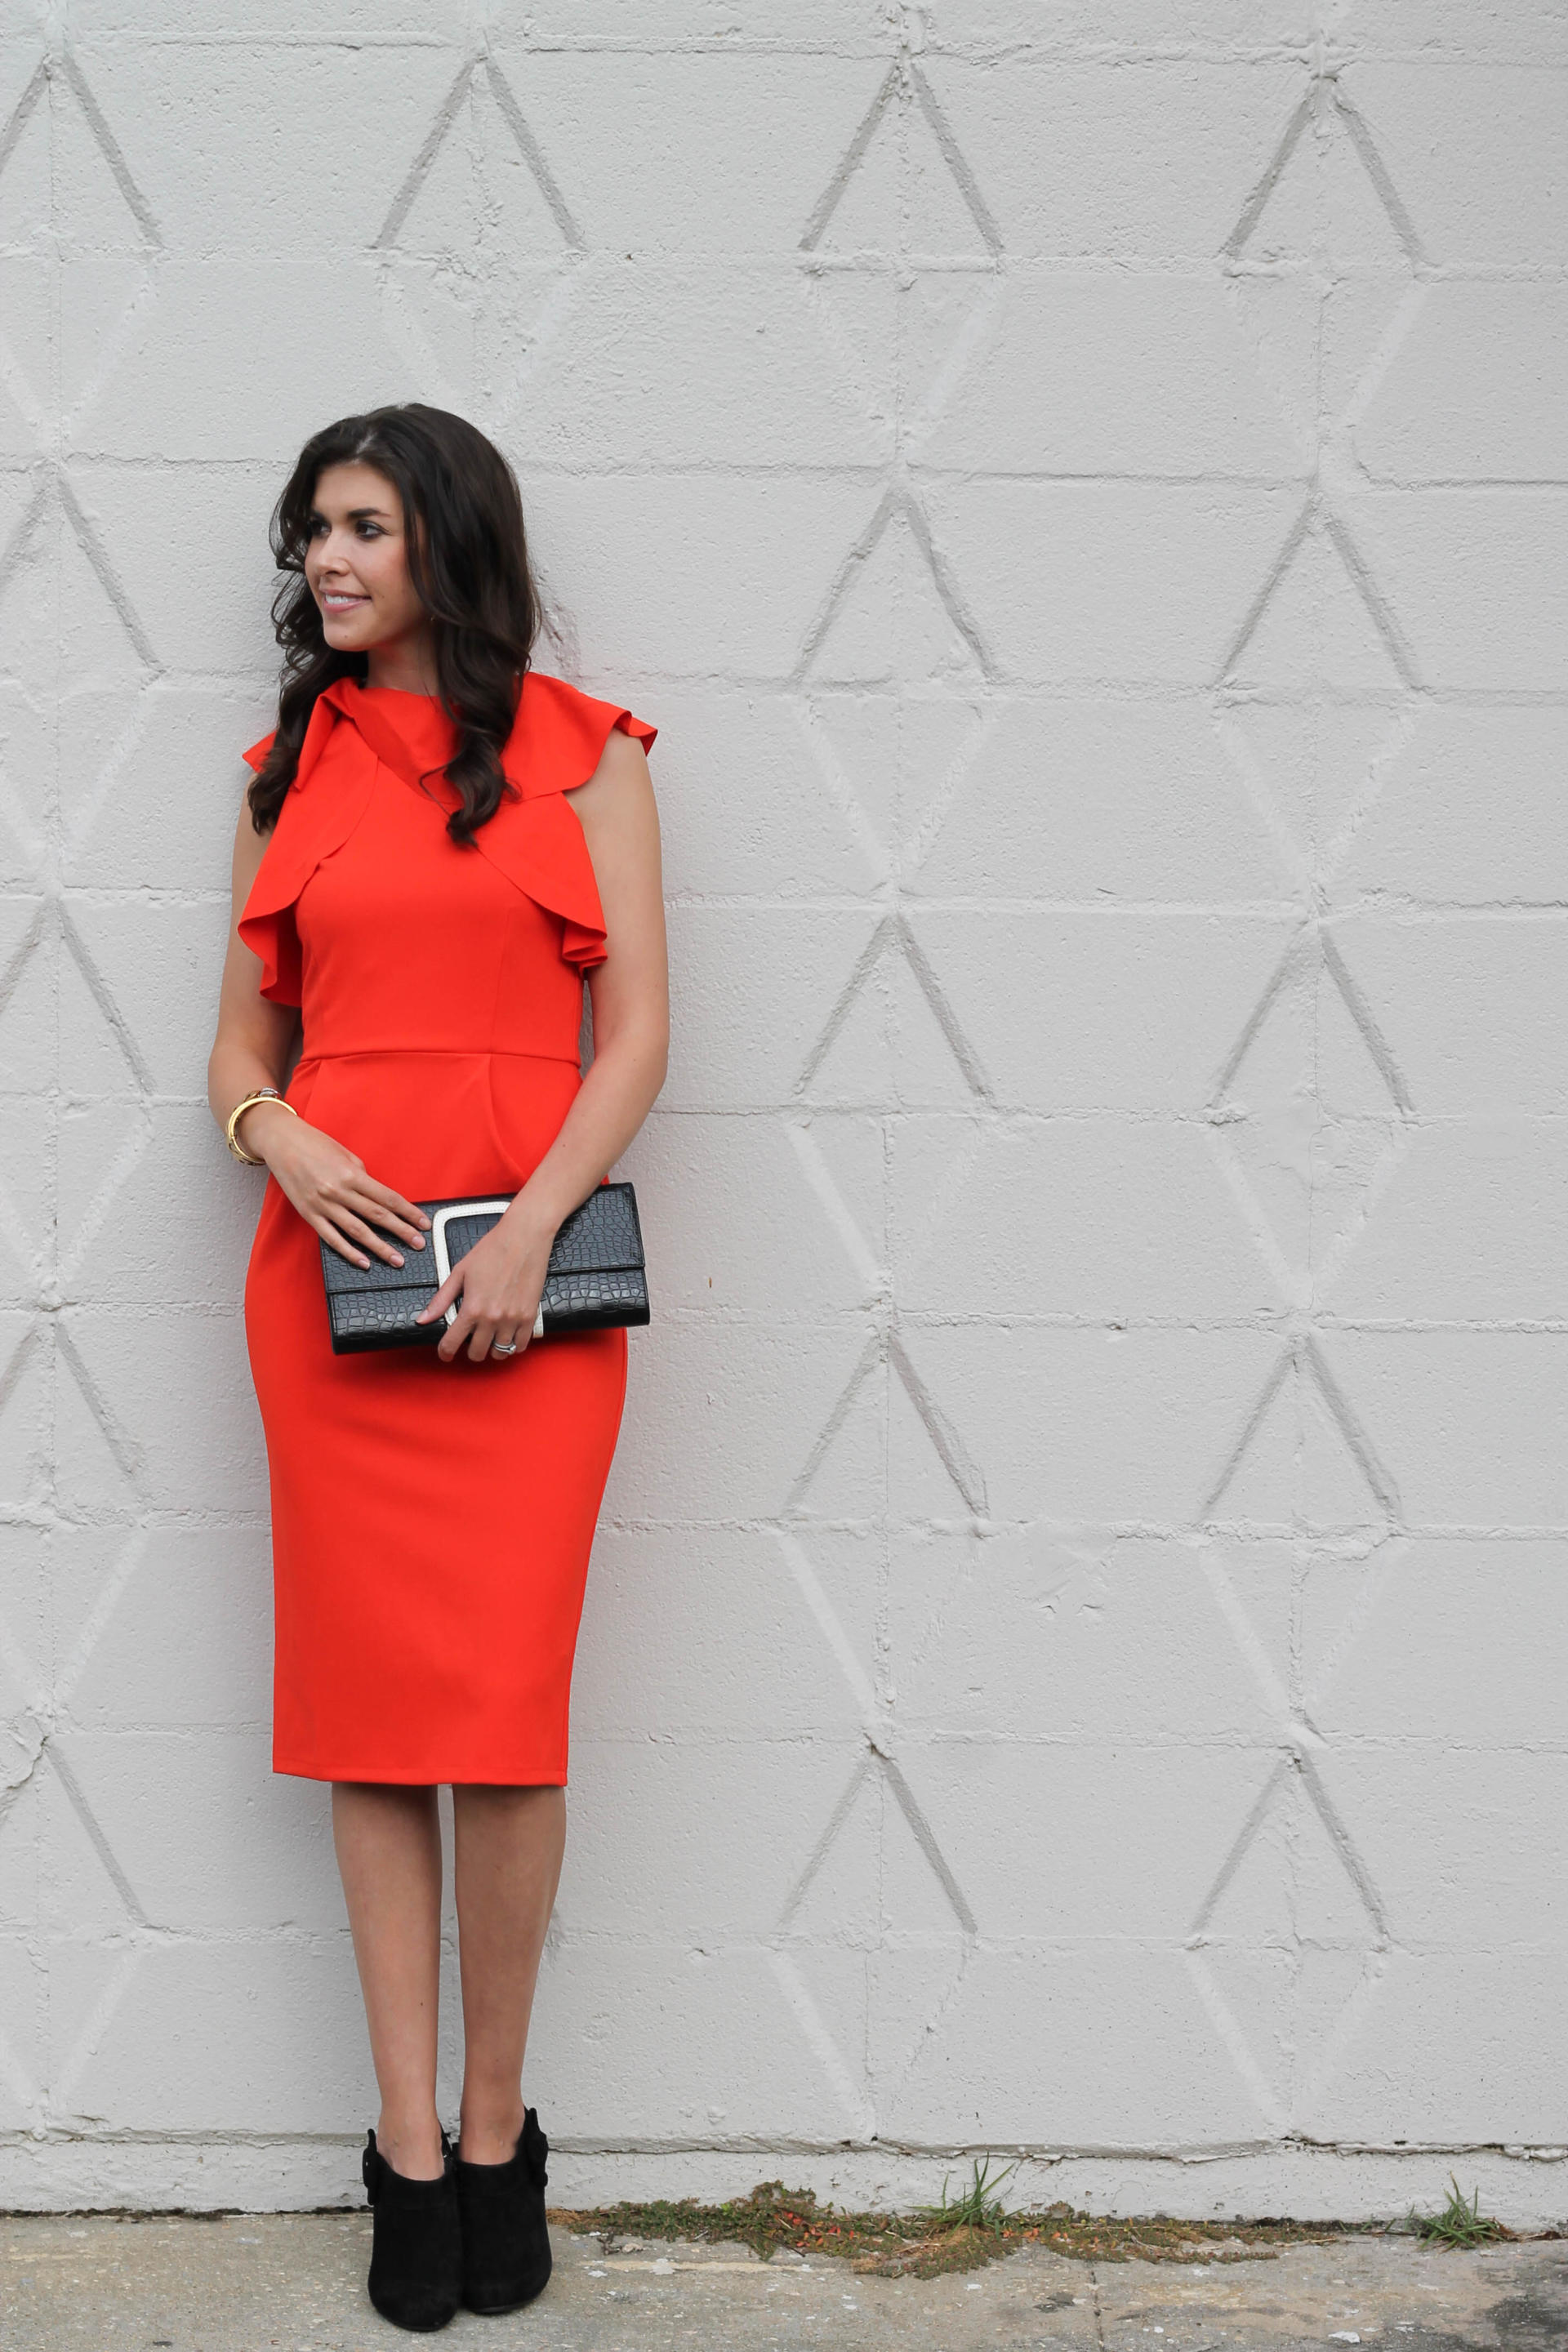 Ruffles - A Red Ruffle Dress for Christmas by New York fashion blogger Style Waltz